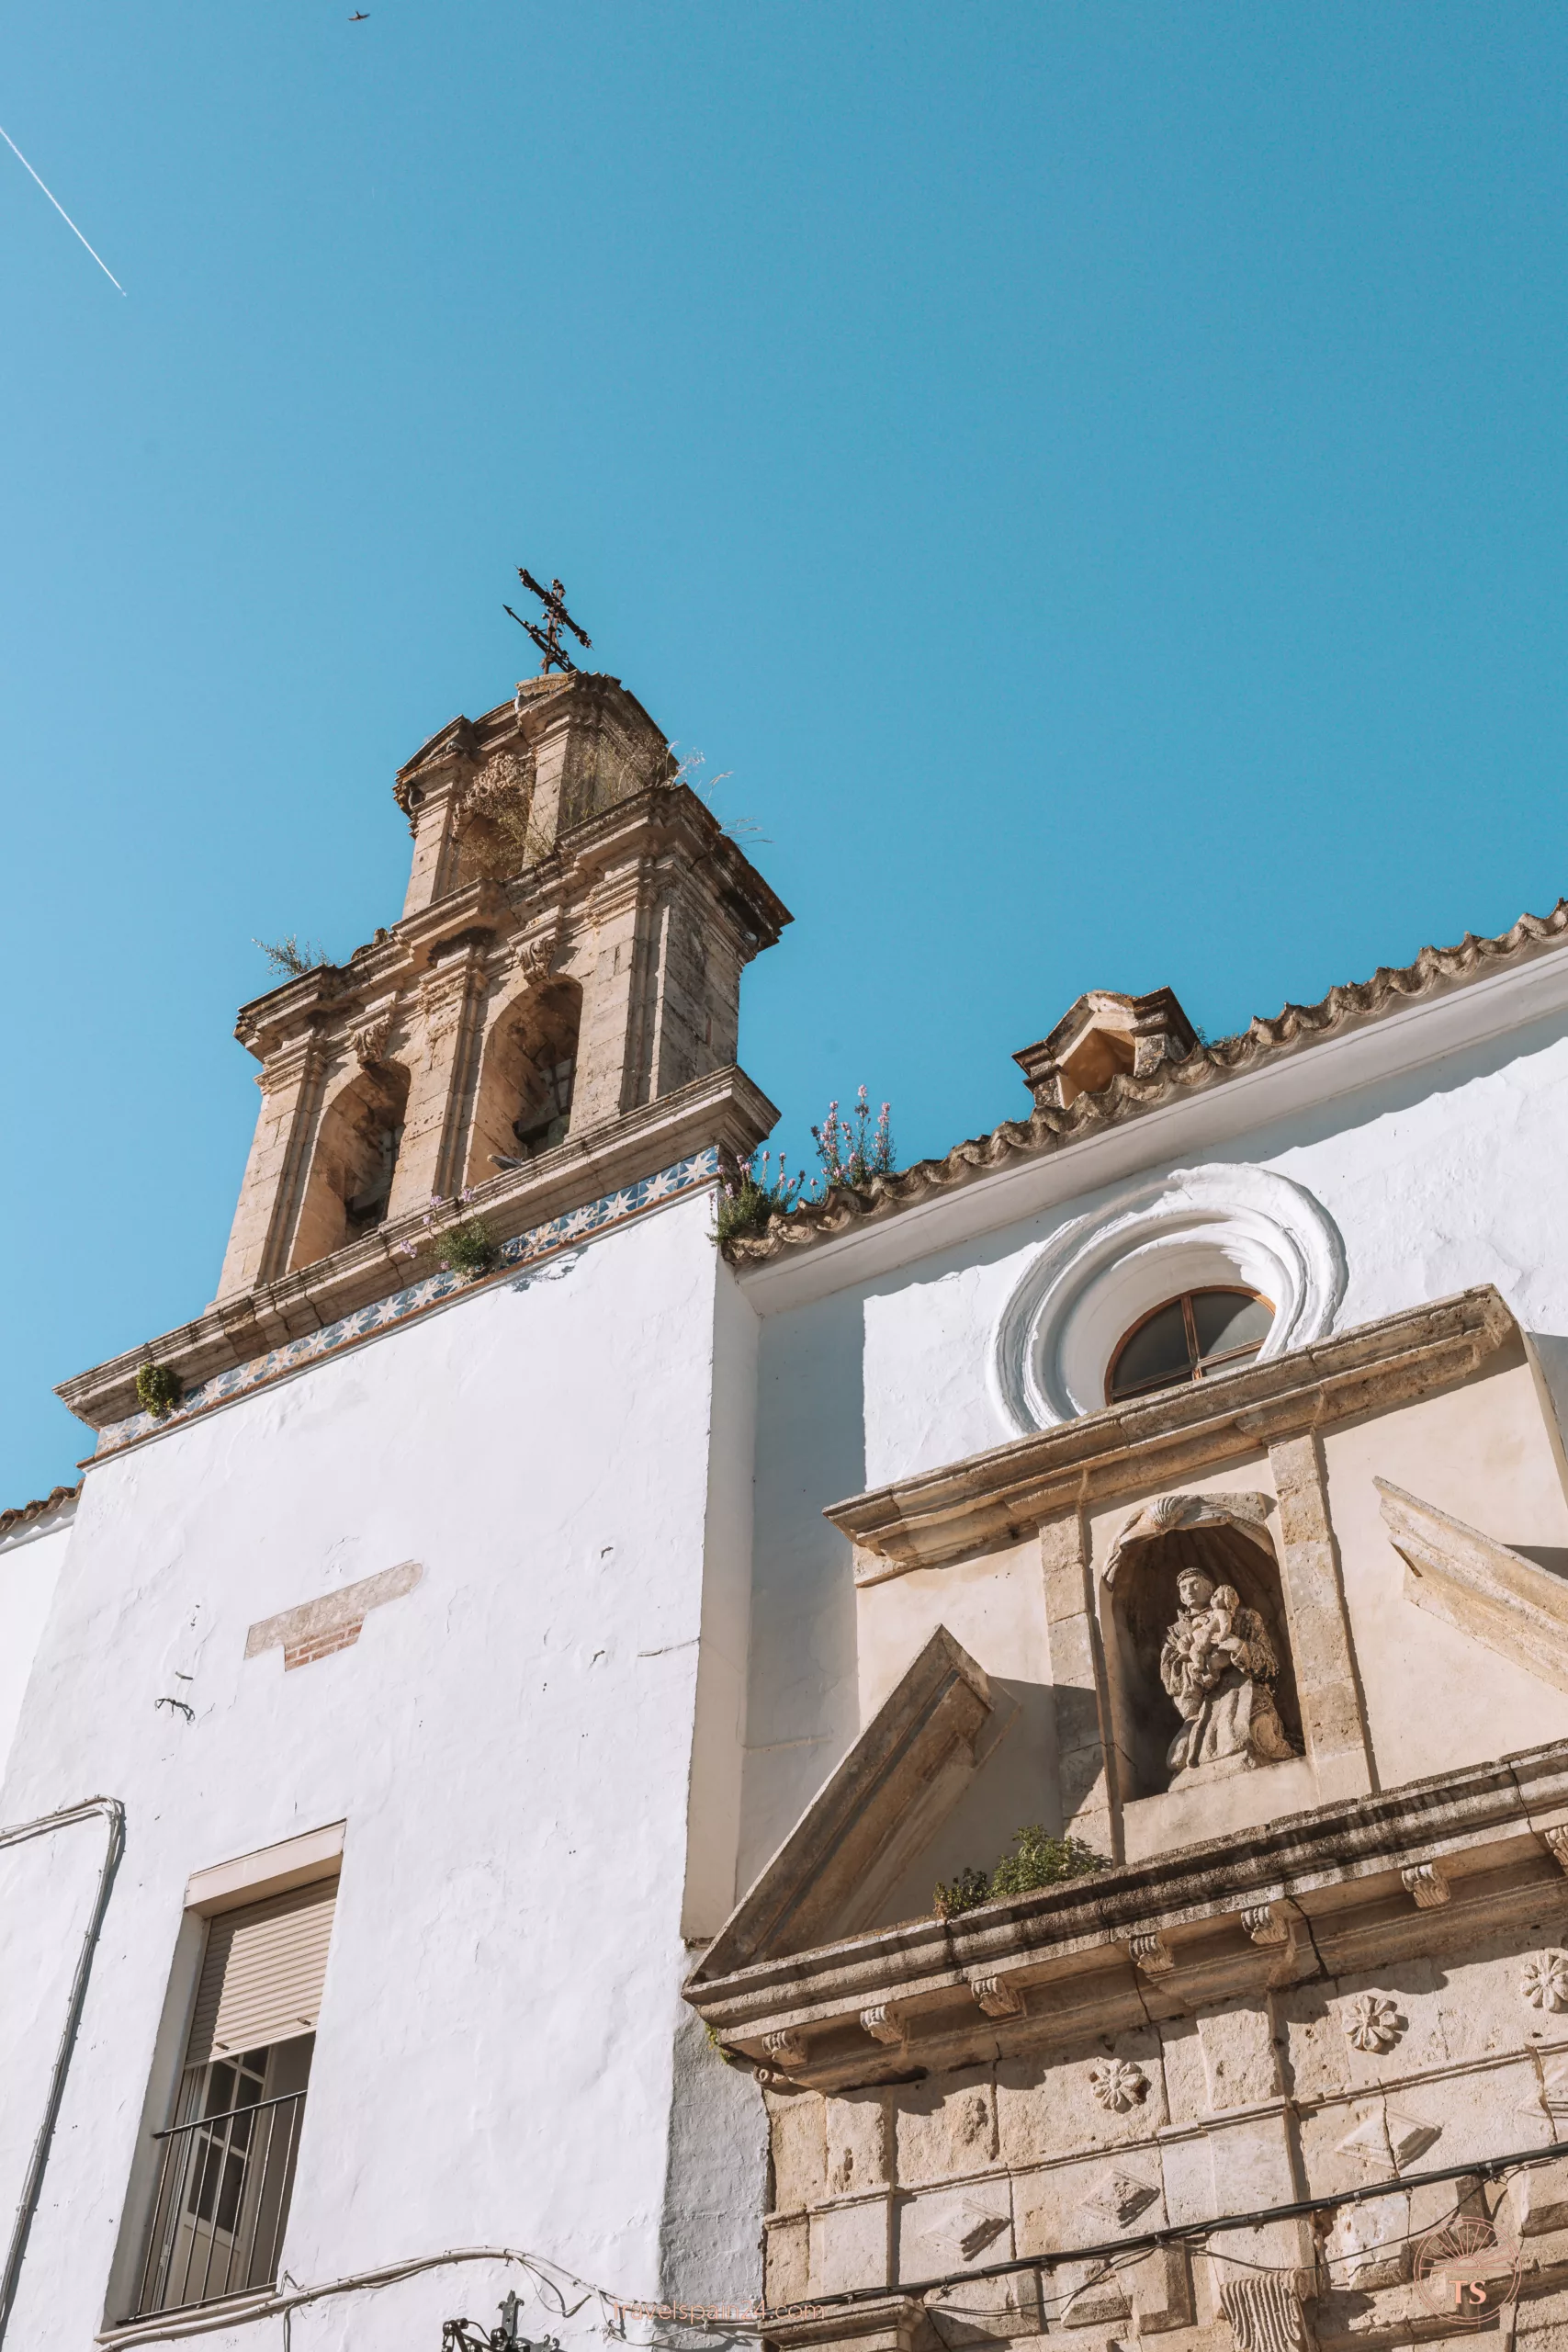 Iglesia de San Juan de Dios in Arcos de la Frontera features a small tower with a cross and tower clocks, and a sacred statue embedded in the wall.